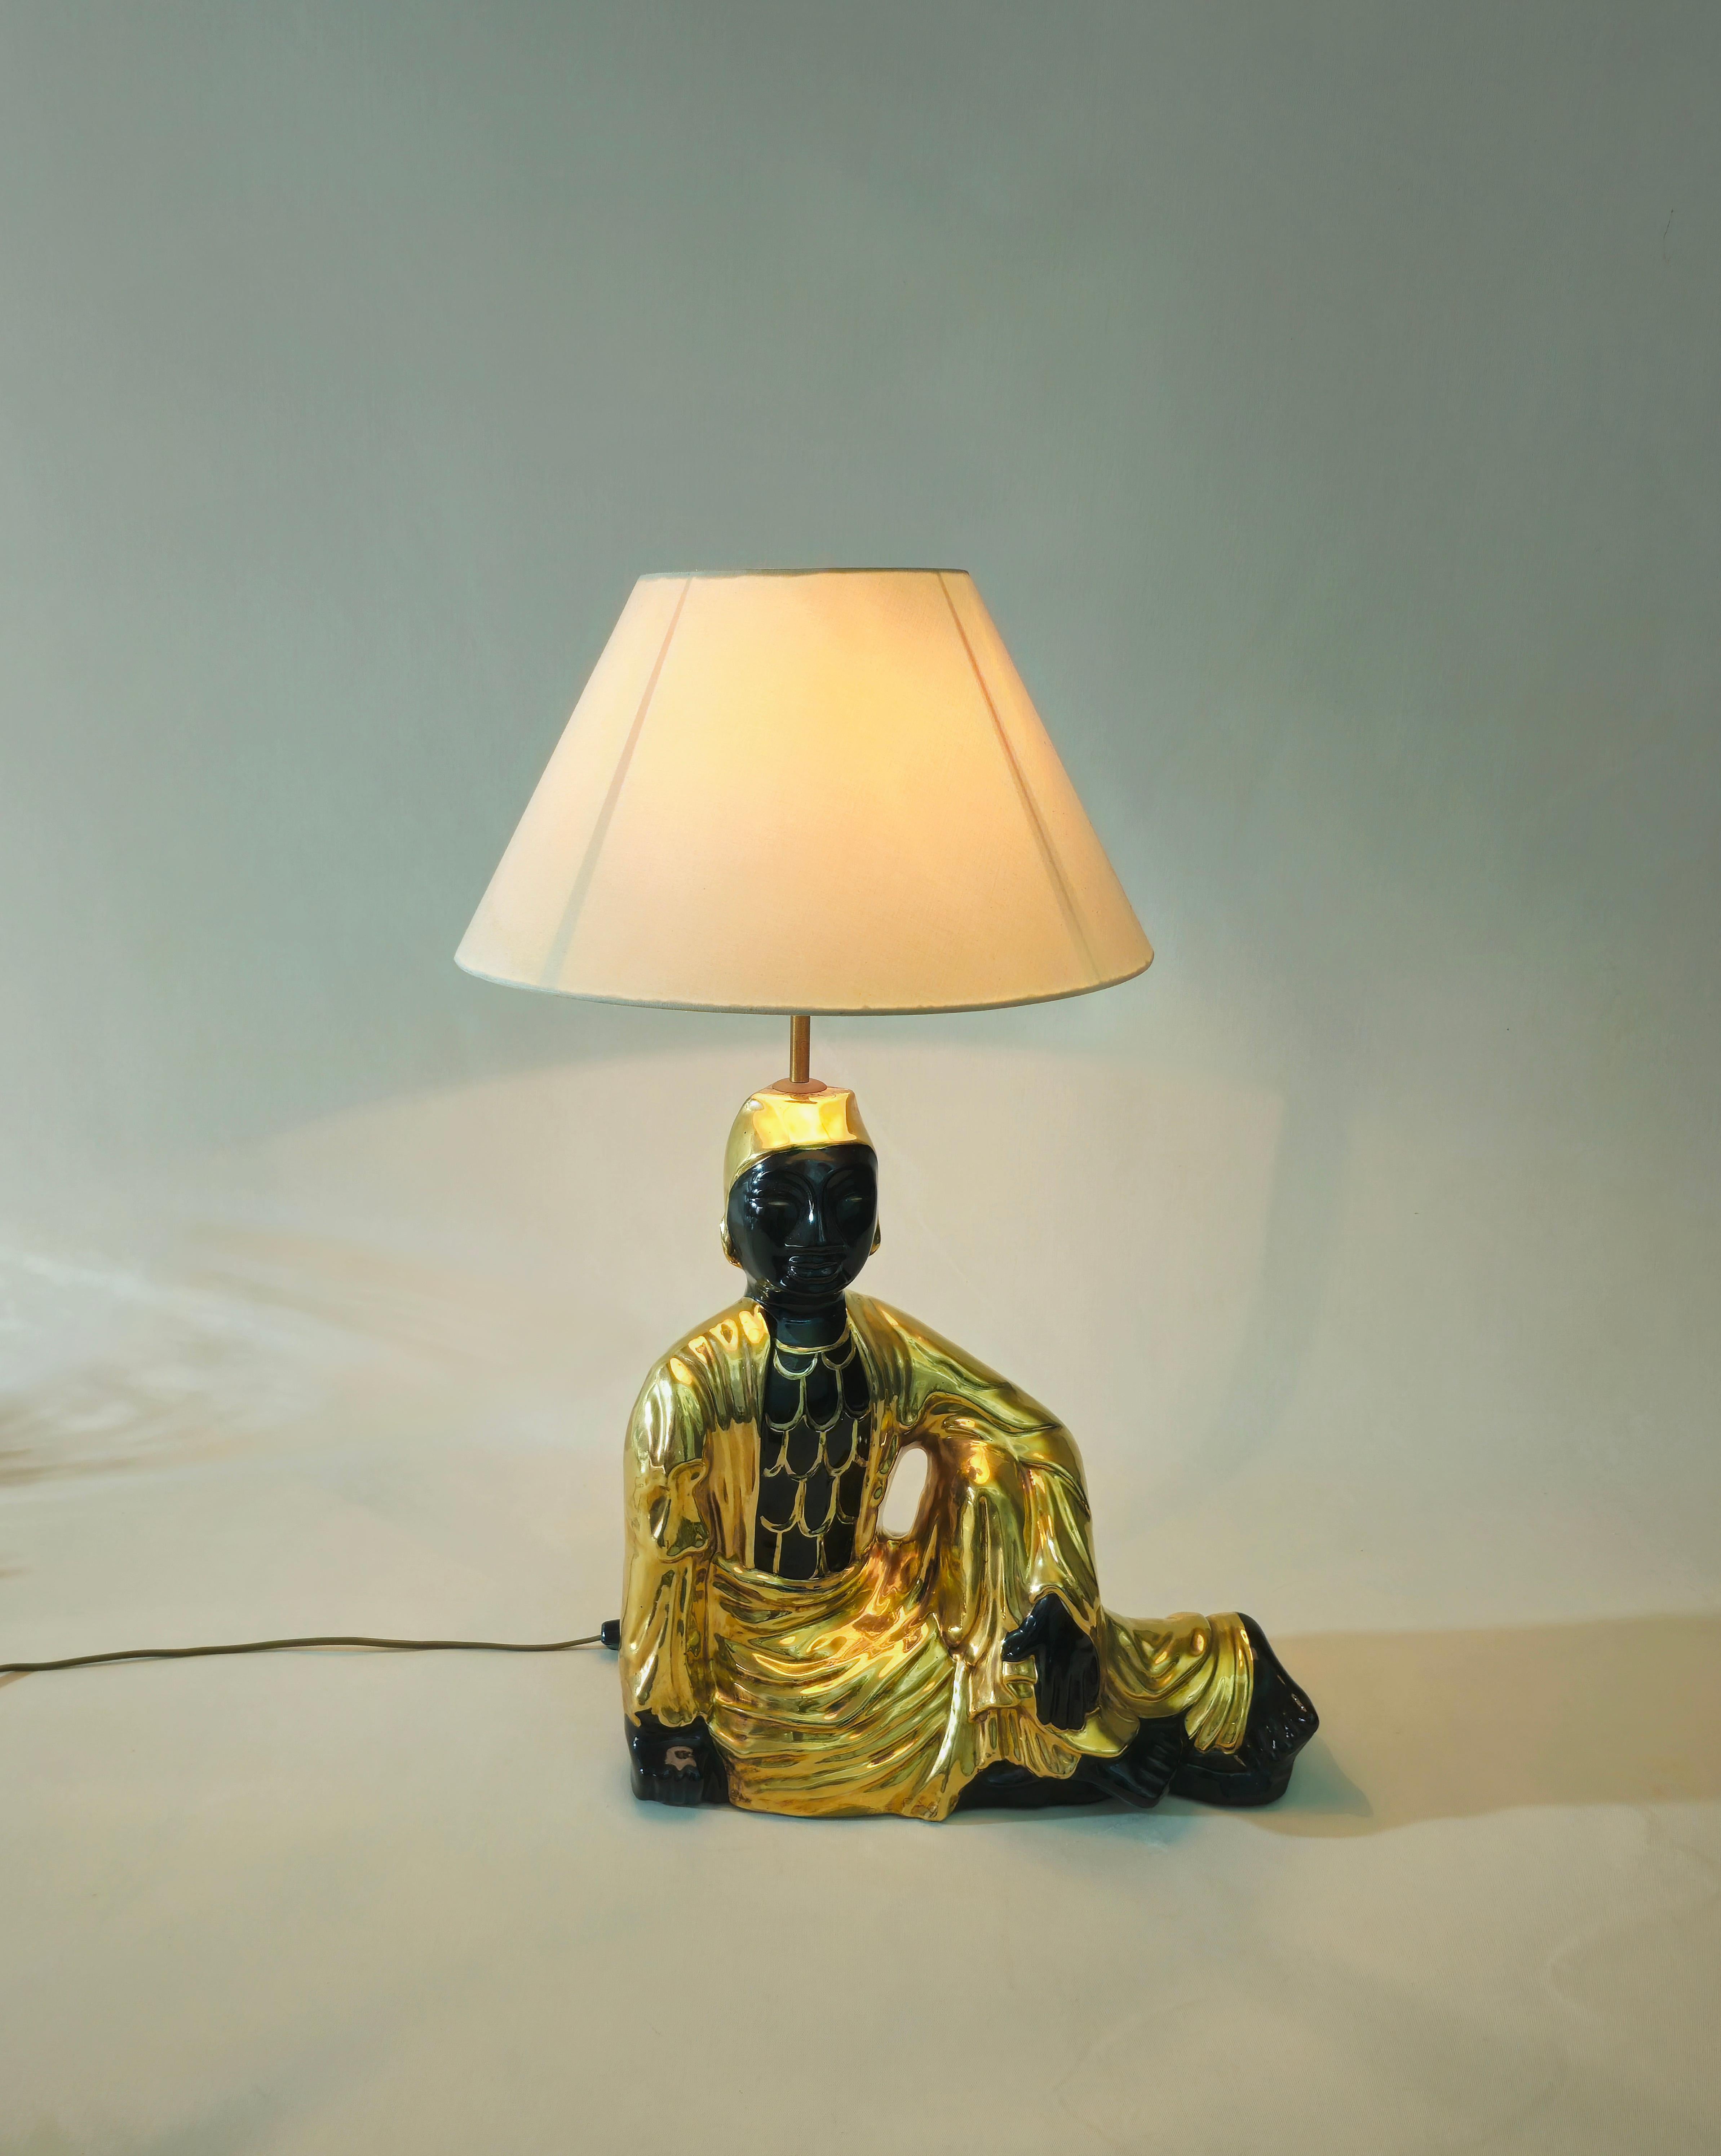 Ceramic Buddha Large Table Lamp Italy 1970s Midcentury For Sale 4